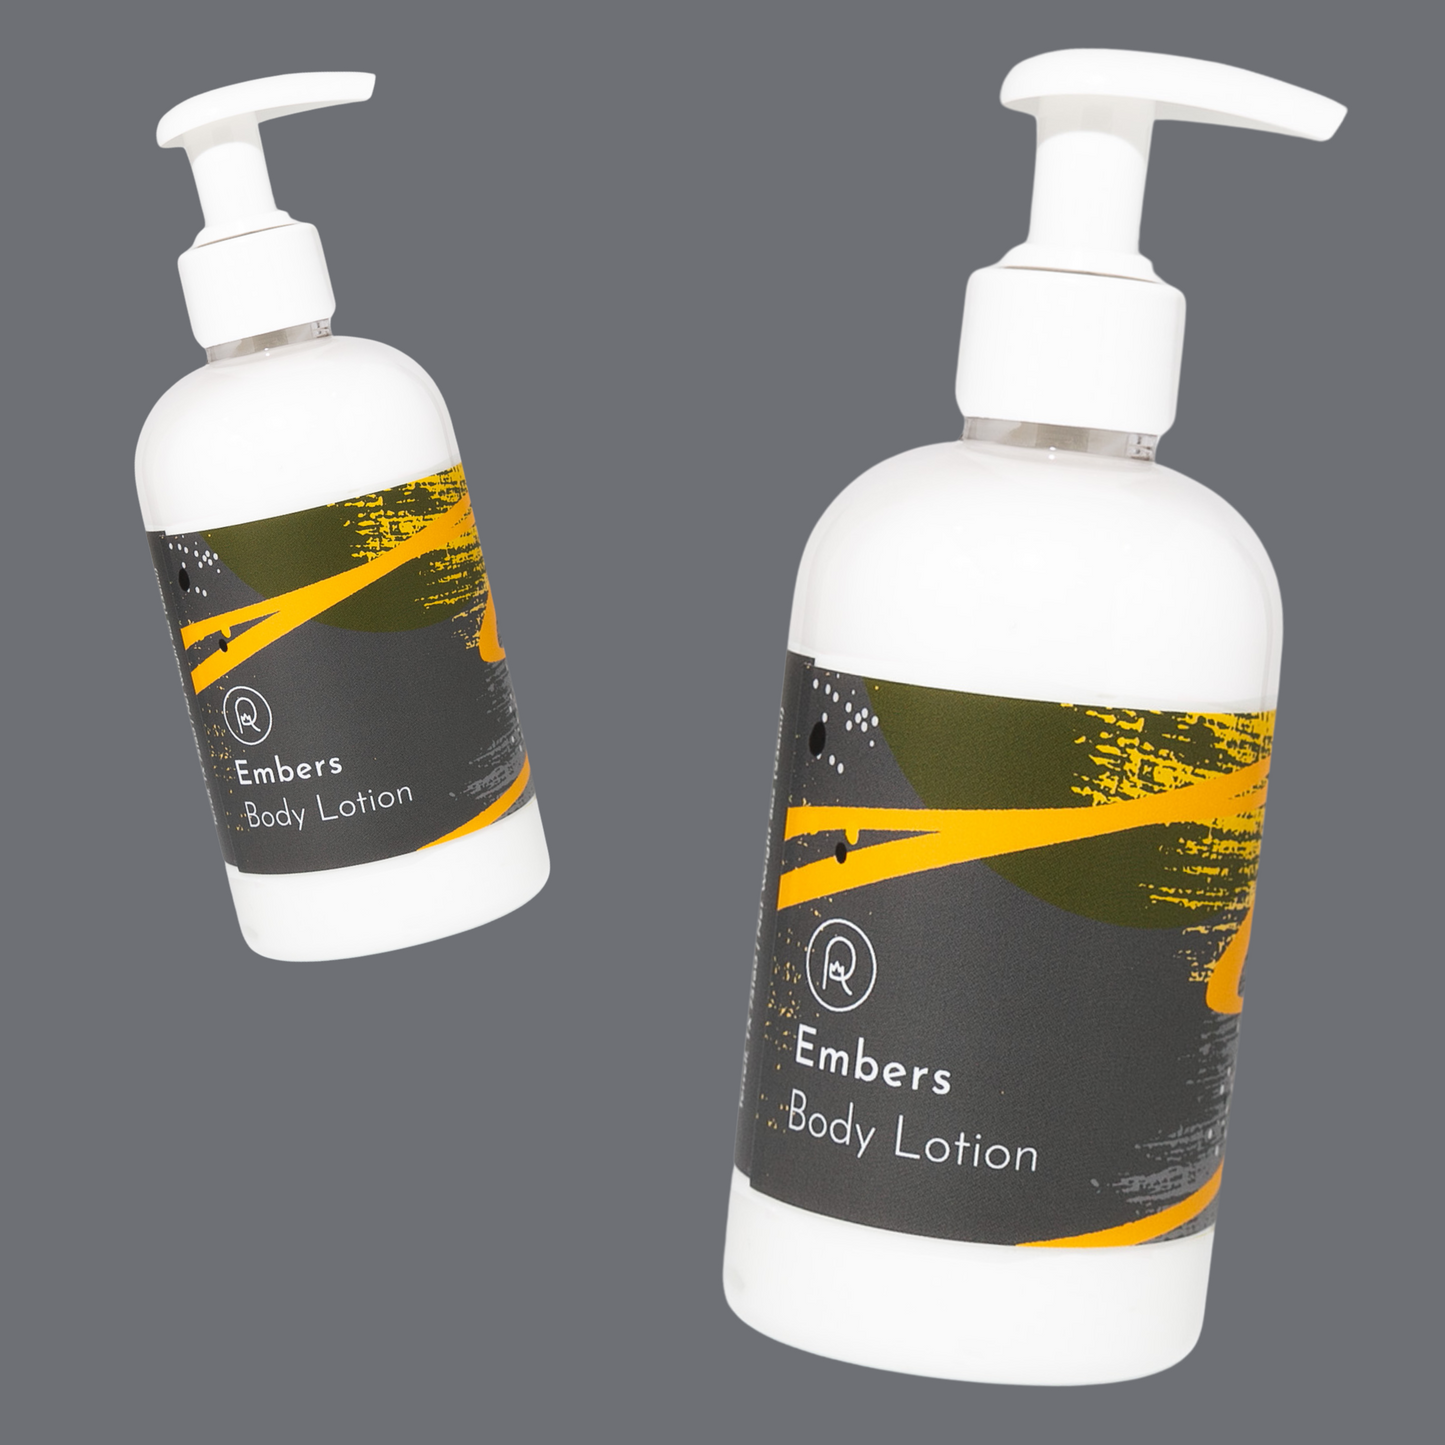 Embers Body Lotion